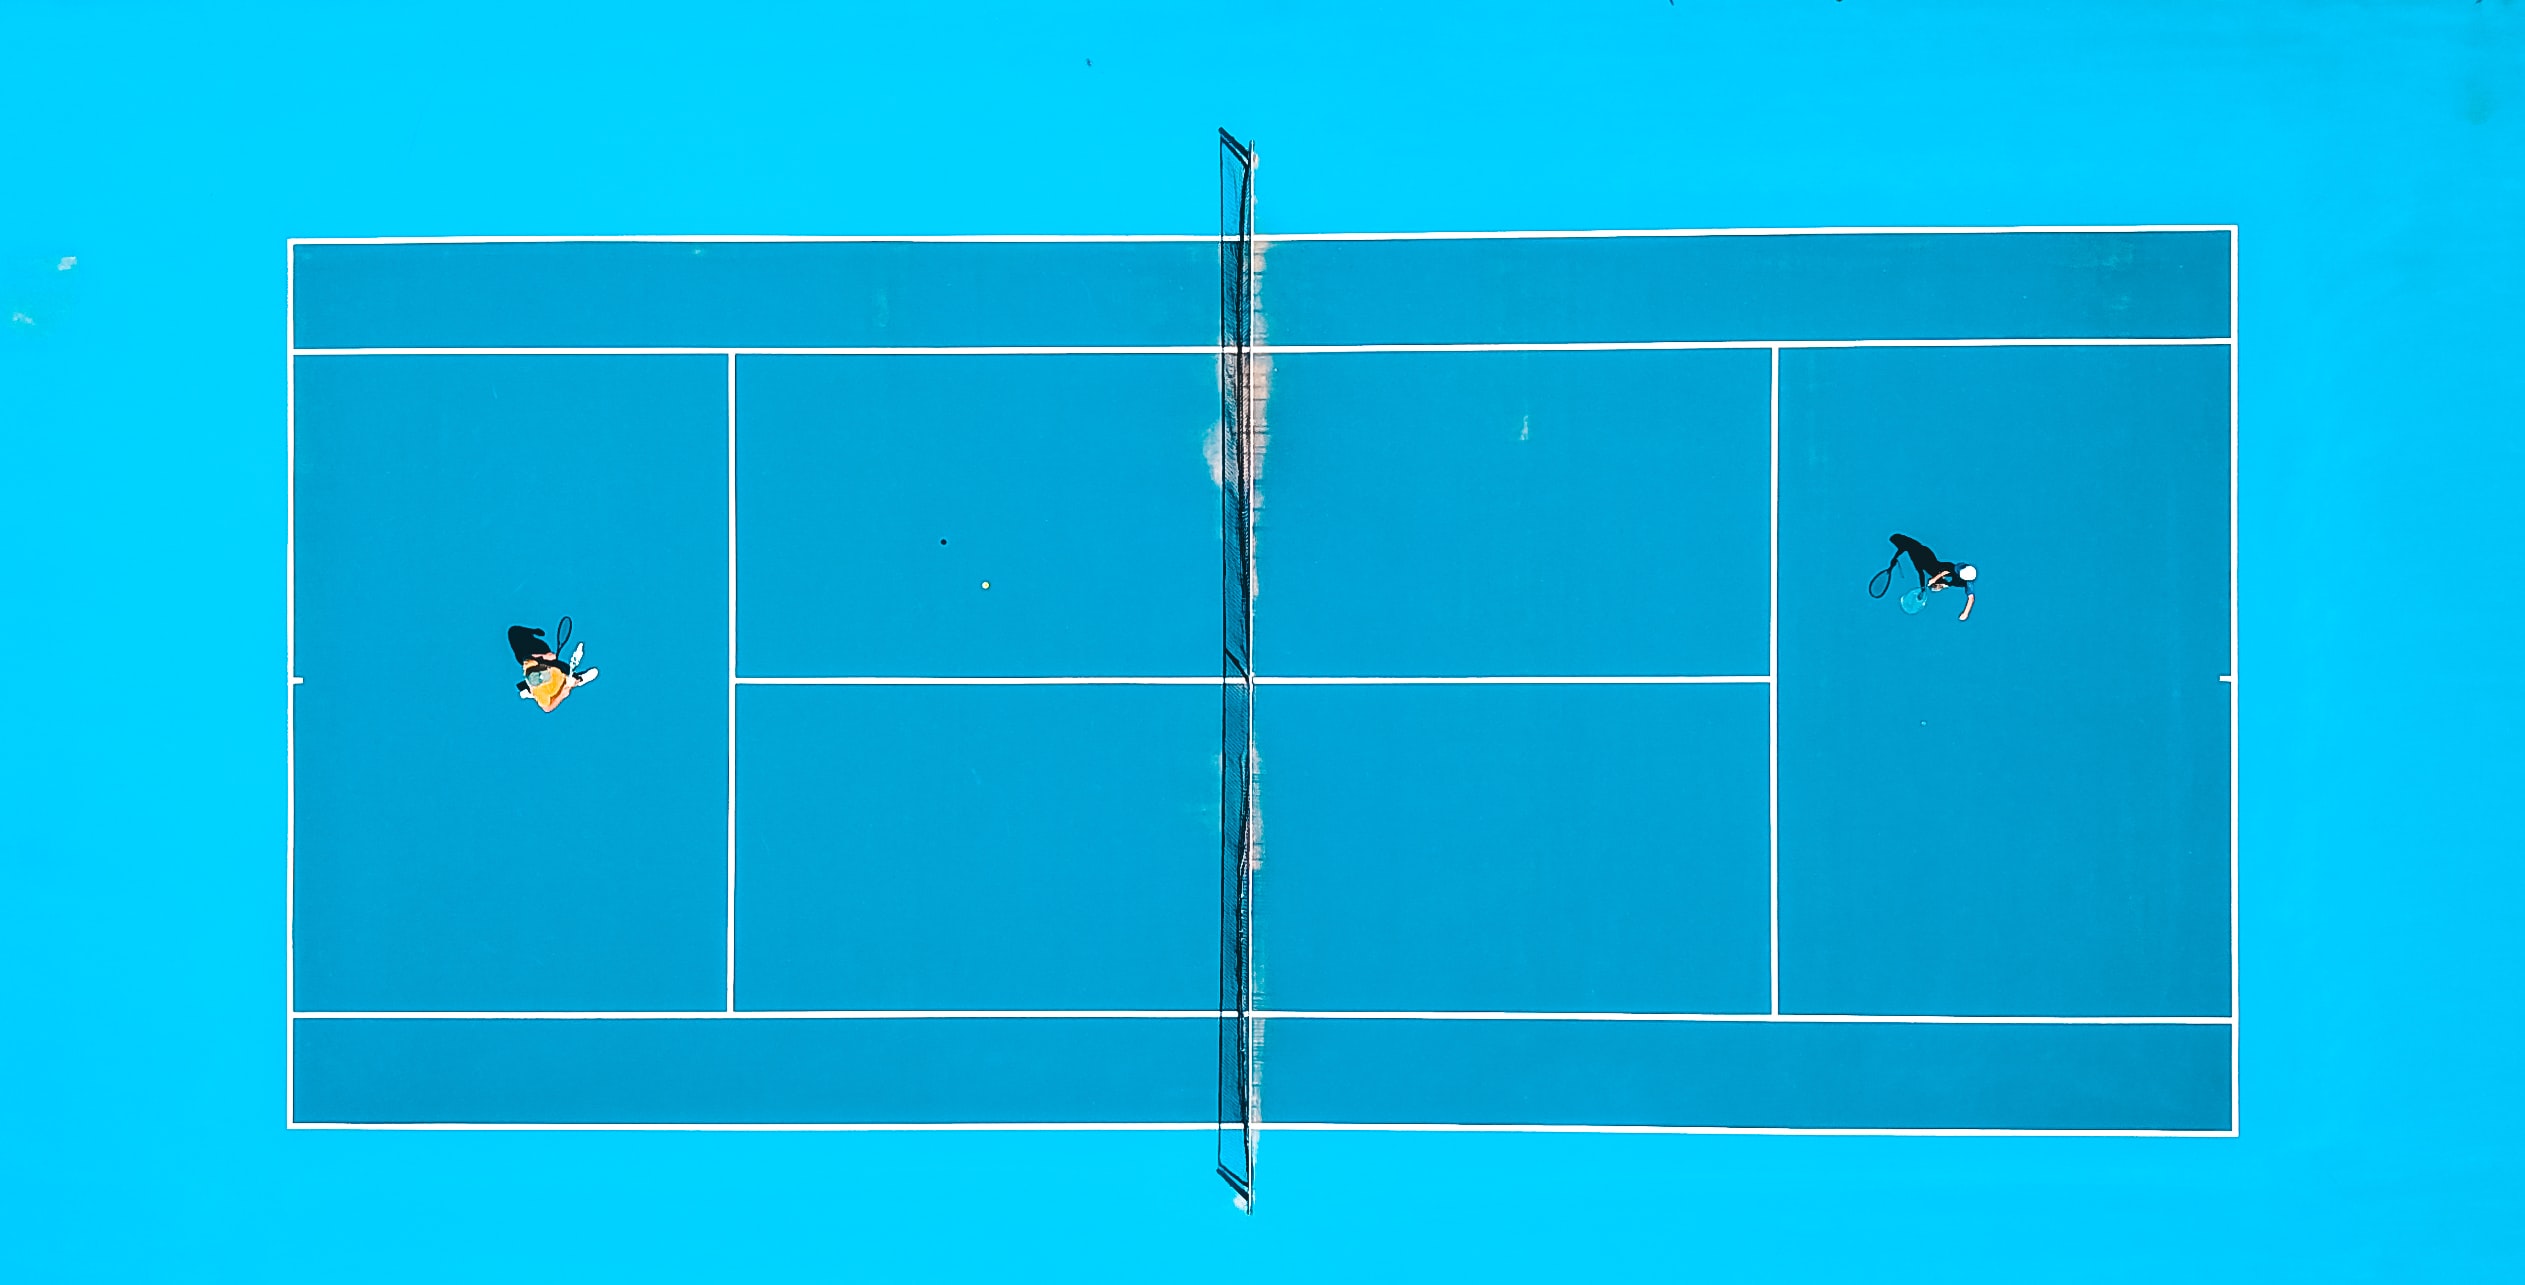 Tennis court from overhead